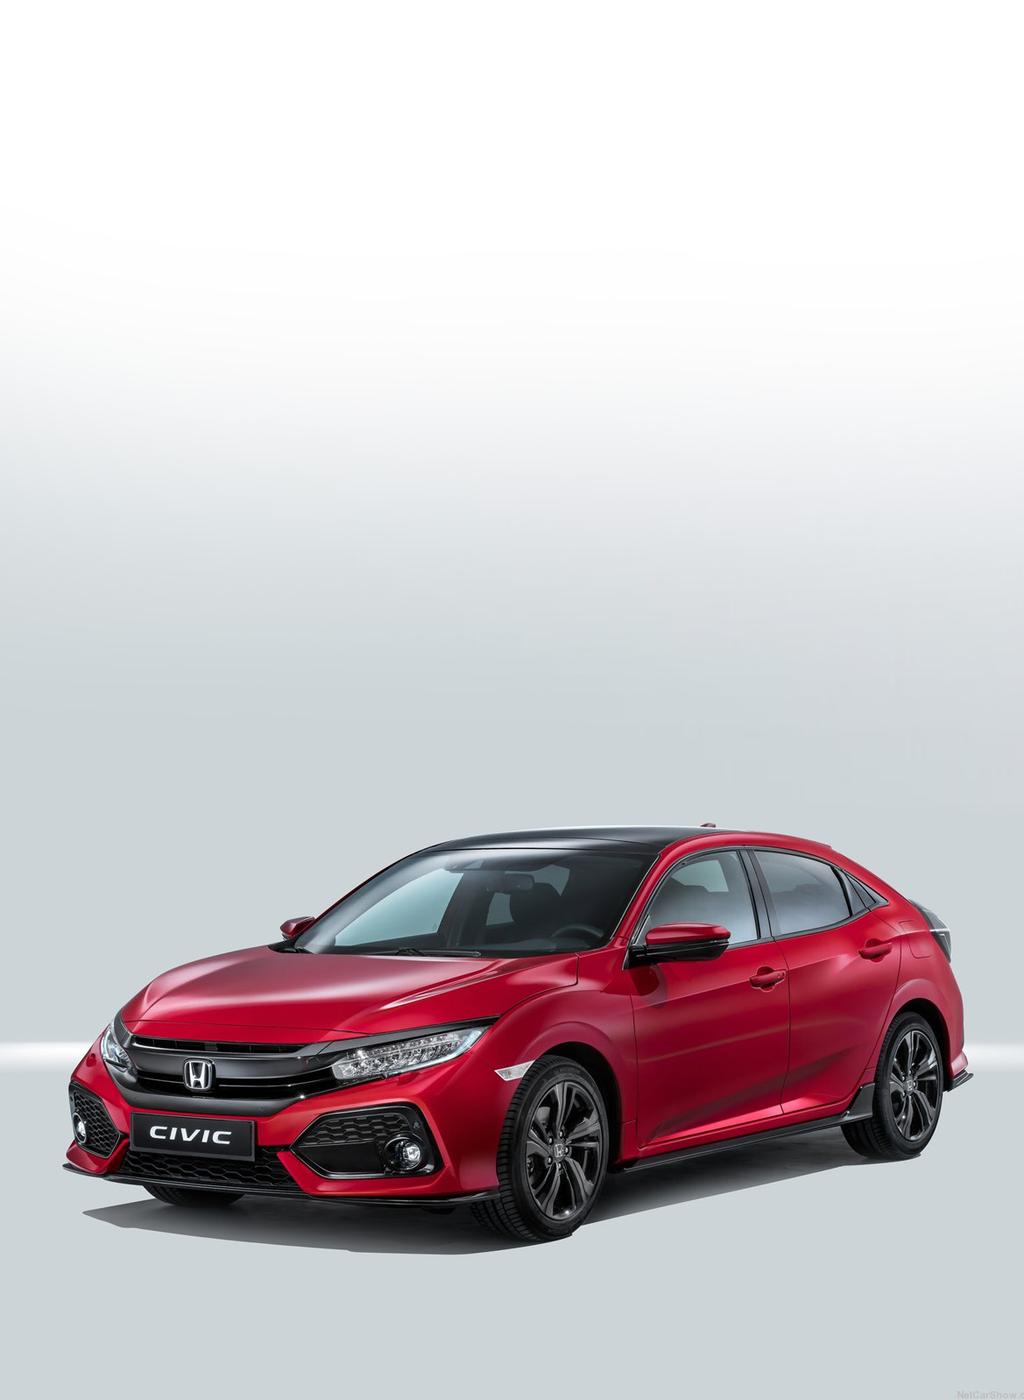 HONDA CIVIC 2017 The all-new tenth generation Civic has been completely re-designed and re-engineered, inside and out.